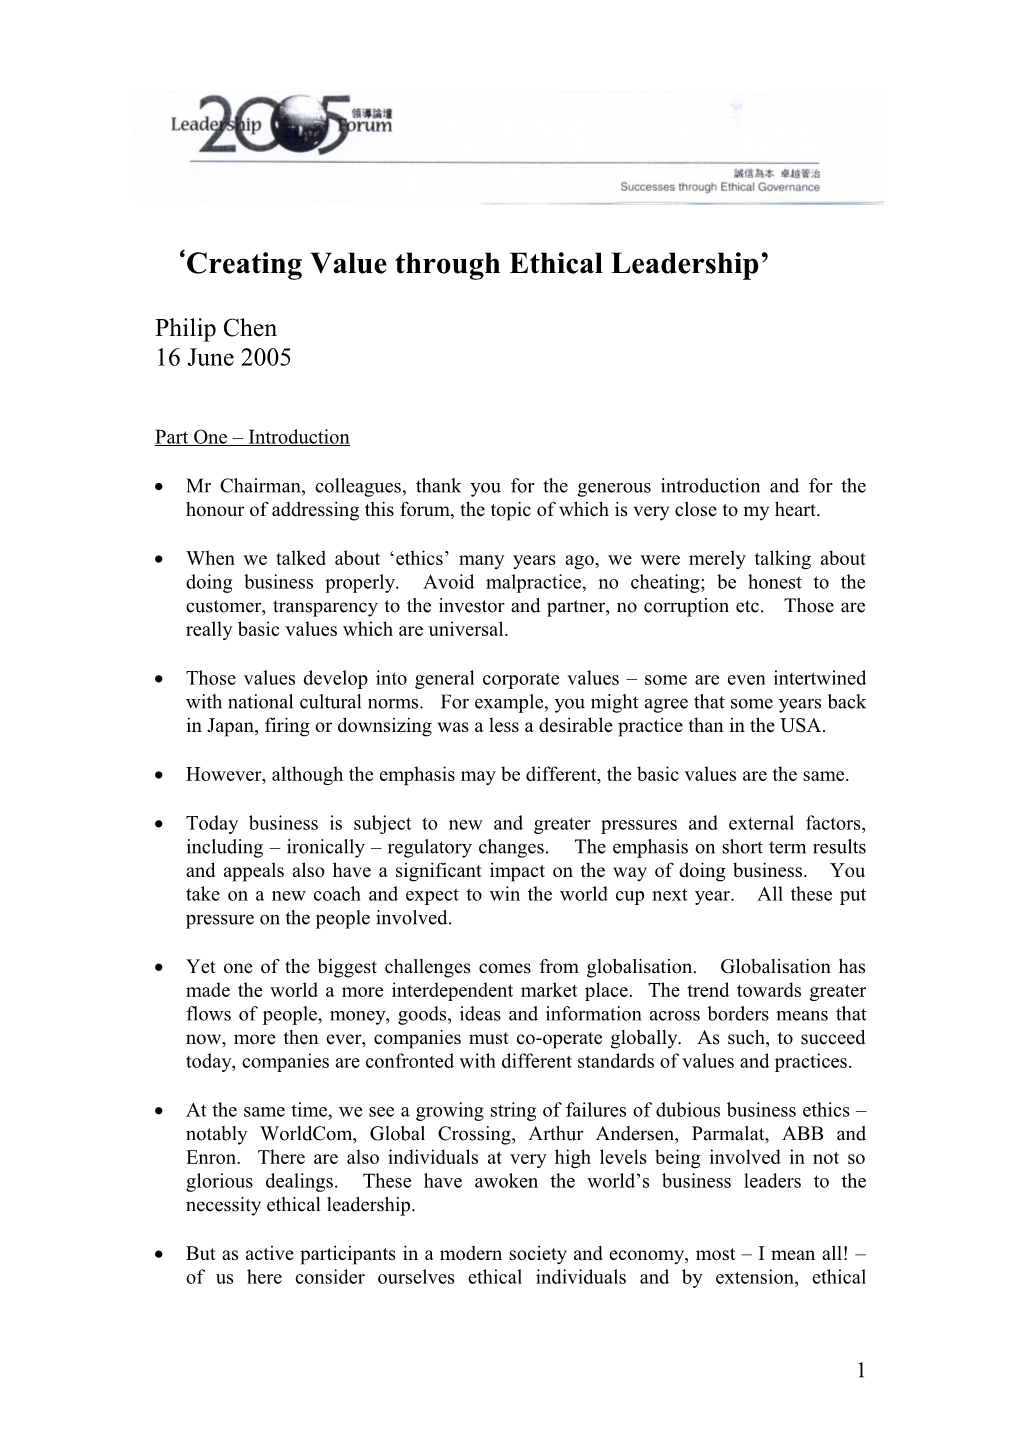 Creating Value Through Ethical Leadership